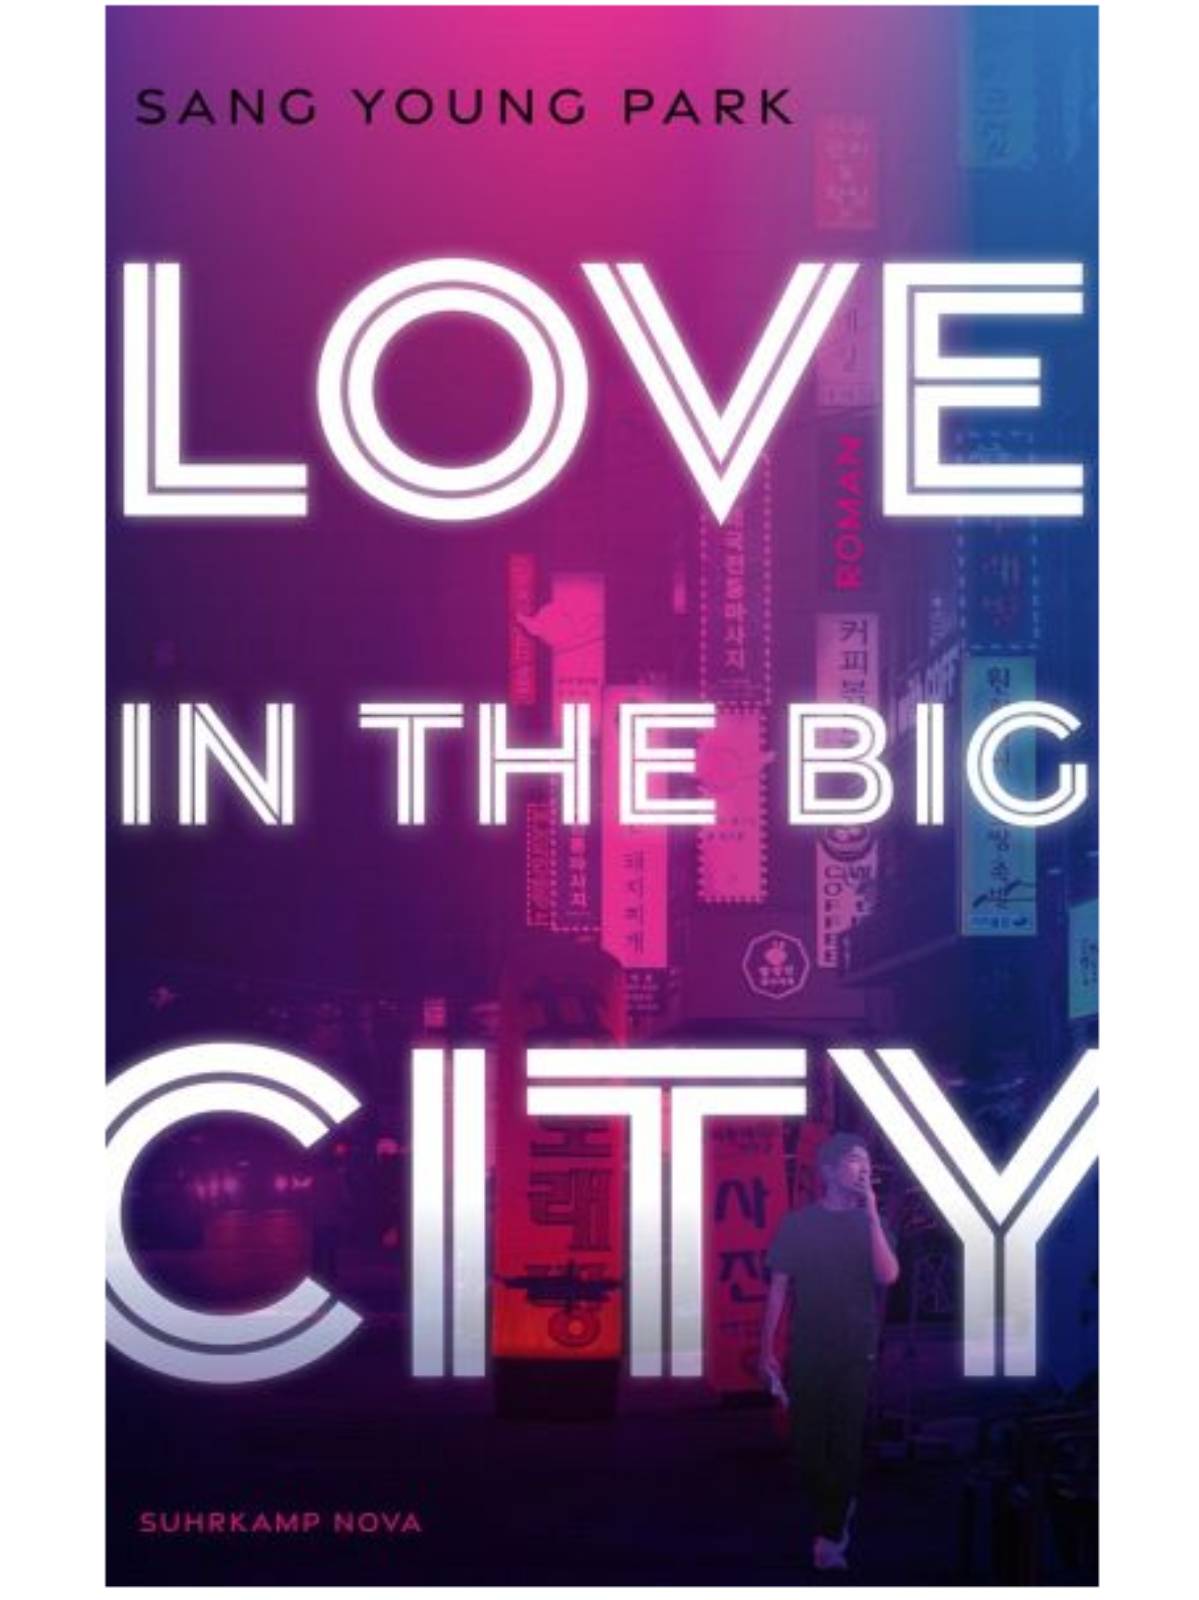 Sang Young Park | Love in the Big City